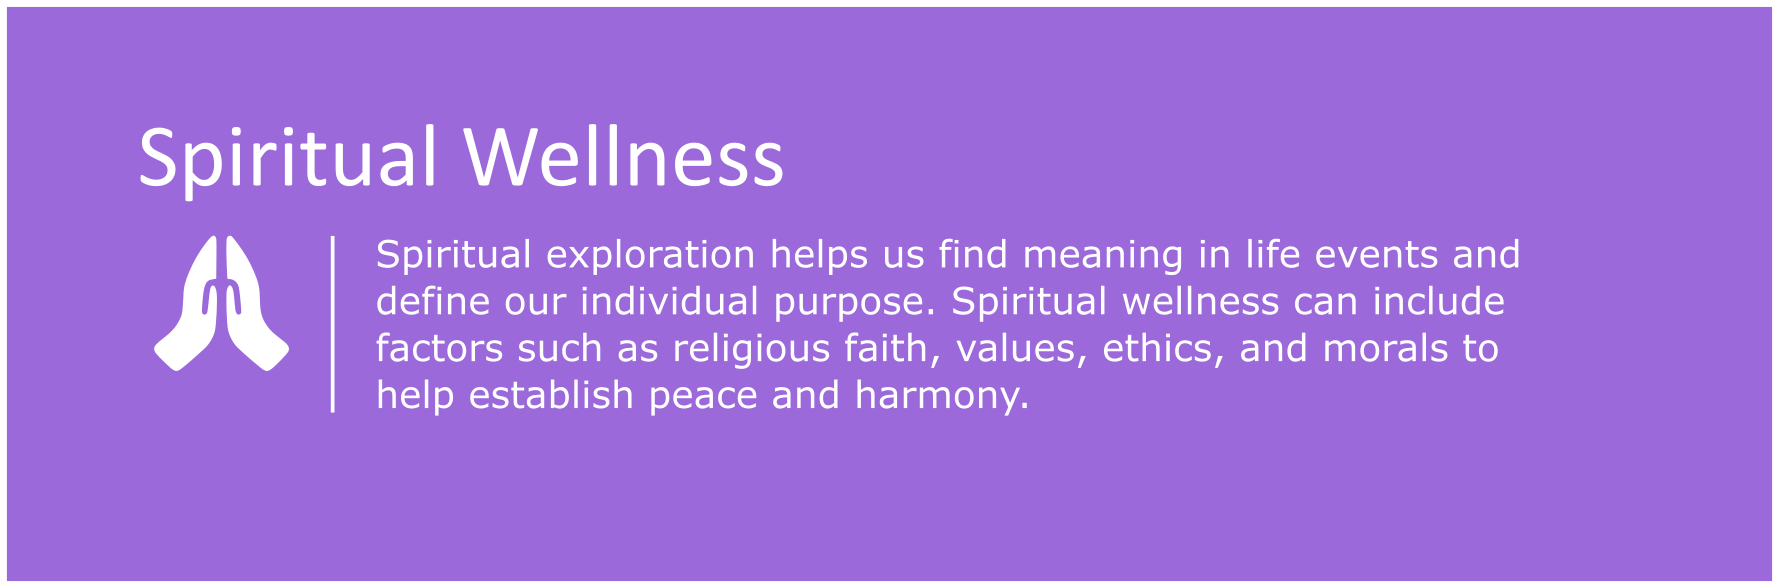 Spiritual exploration helps us find meaning in life events and define our individual purpose. Spiritual wellness can include factors such religious faith, values, ethics and morals to help establish peace and harmony.